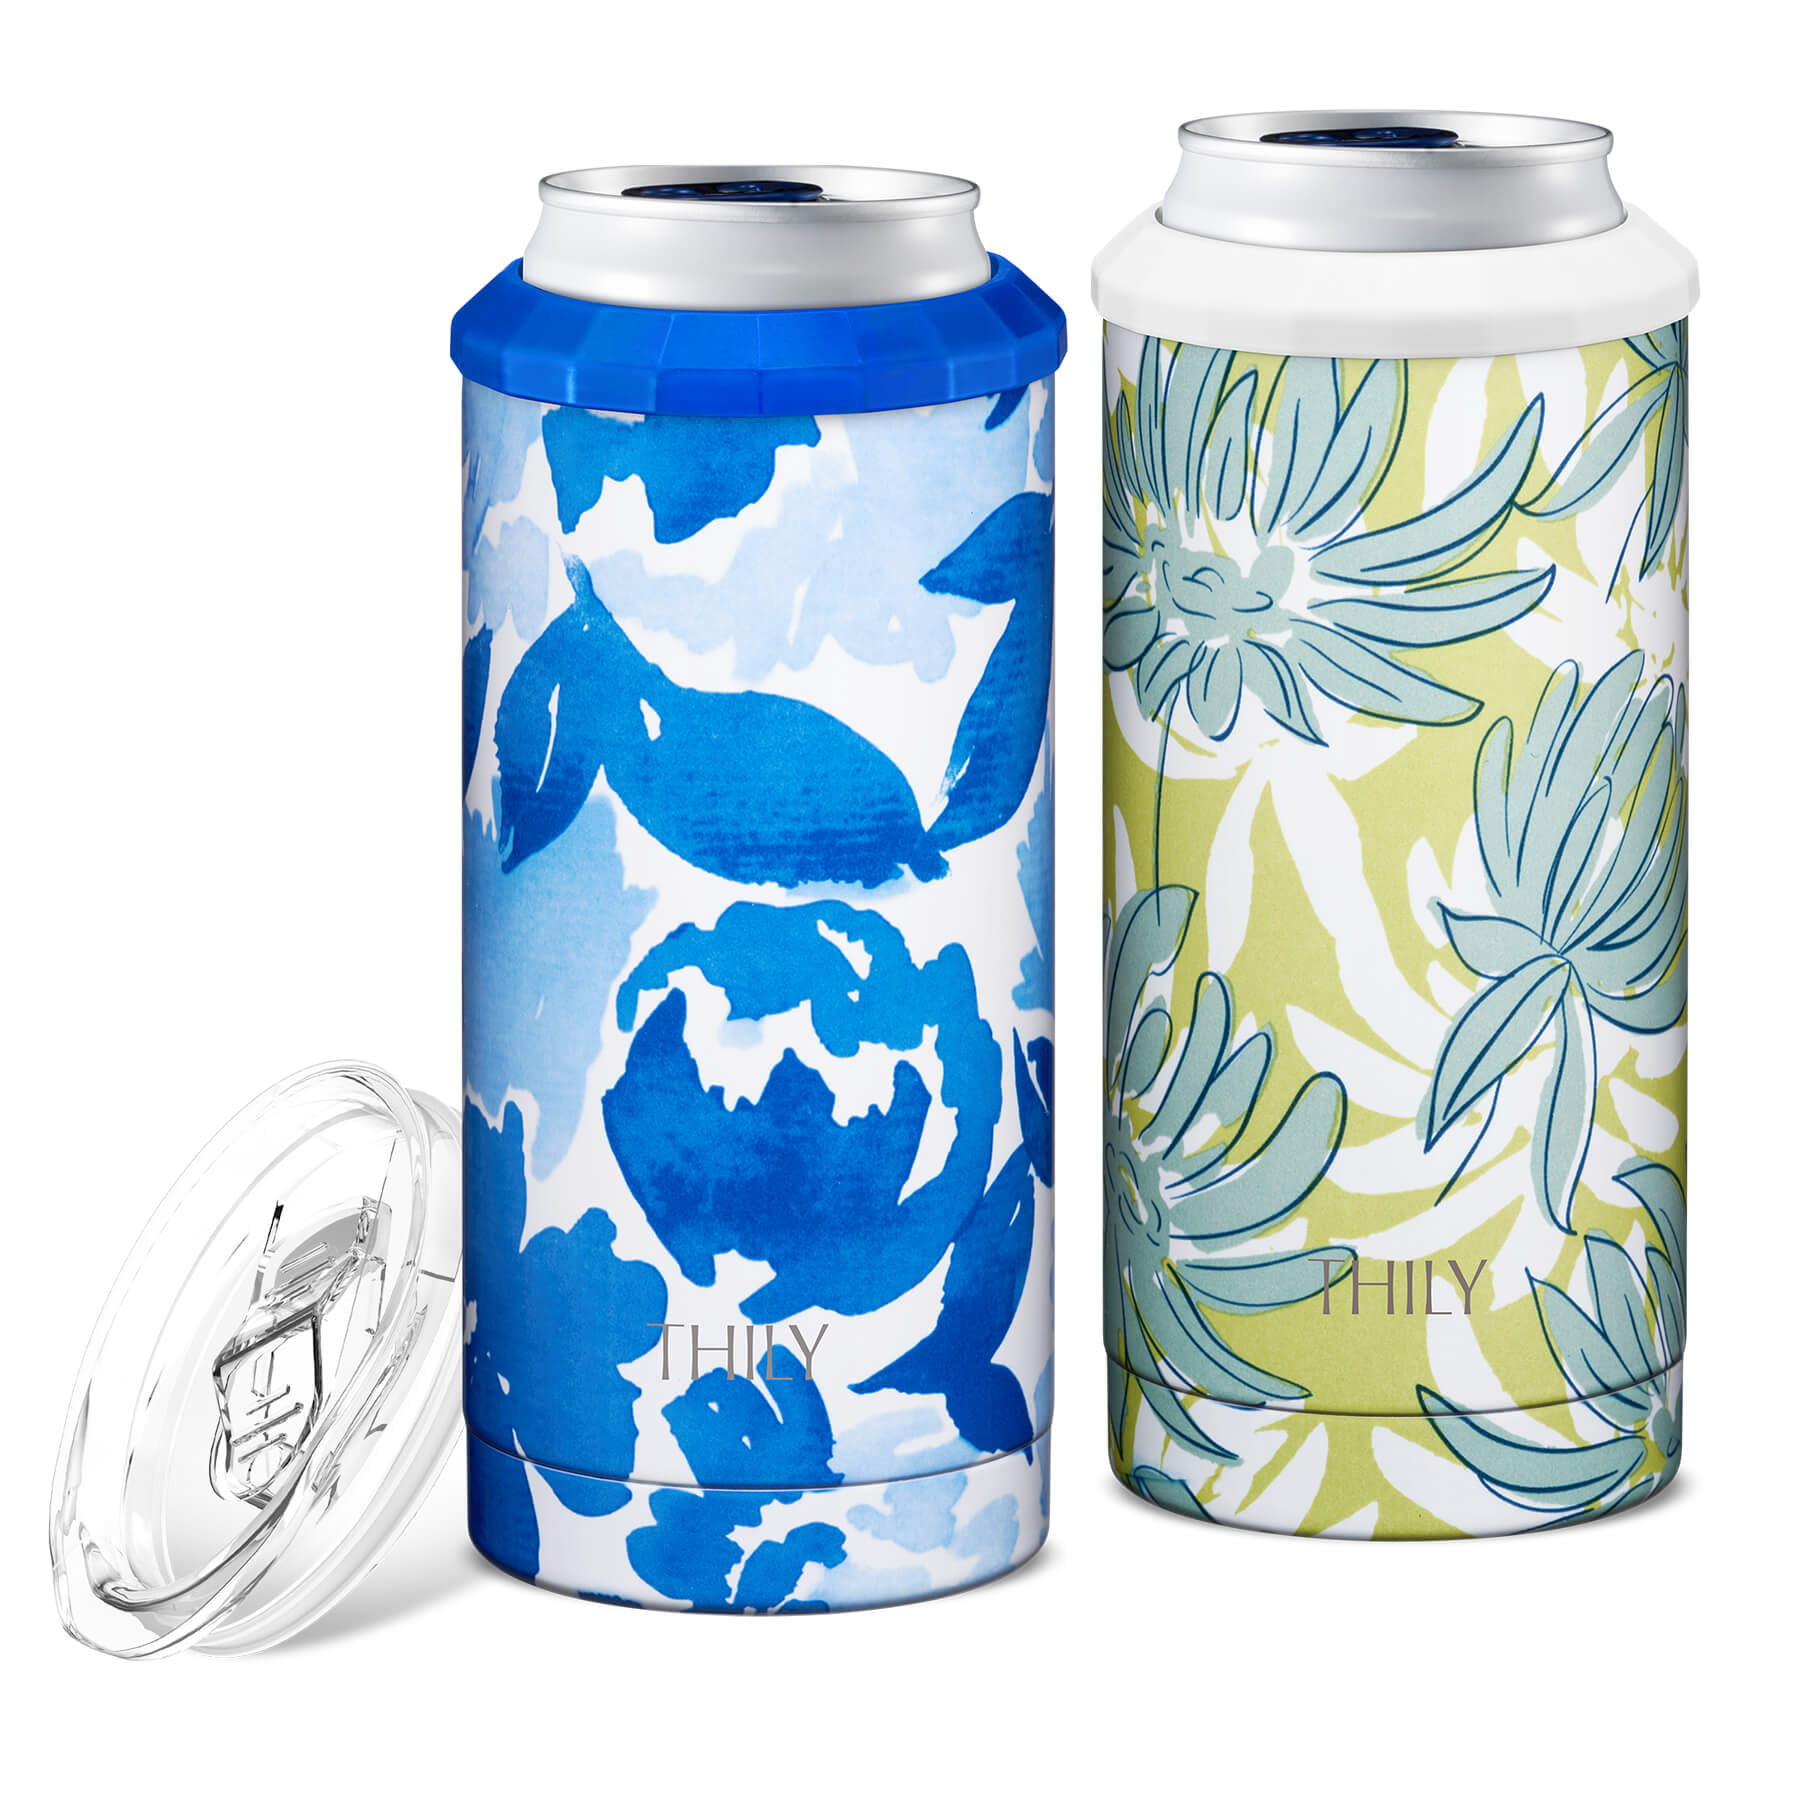 4pack Slim Can Coozie,Cooler Bags,Slim Can Holder Beer Cooler Bags Fits  12oz Slim Energy